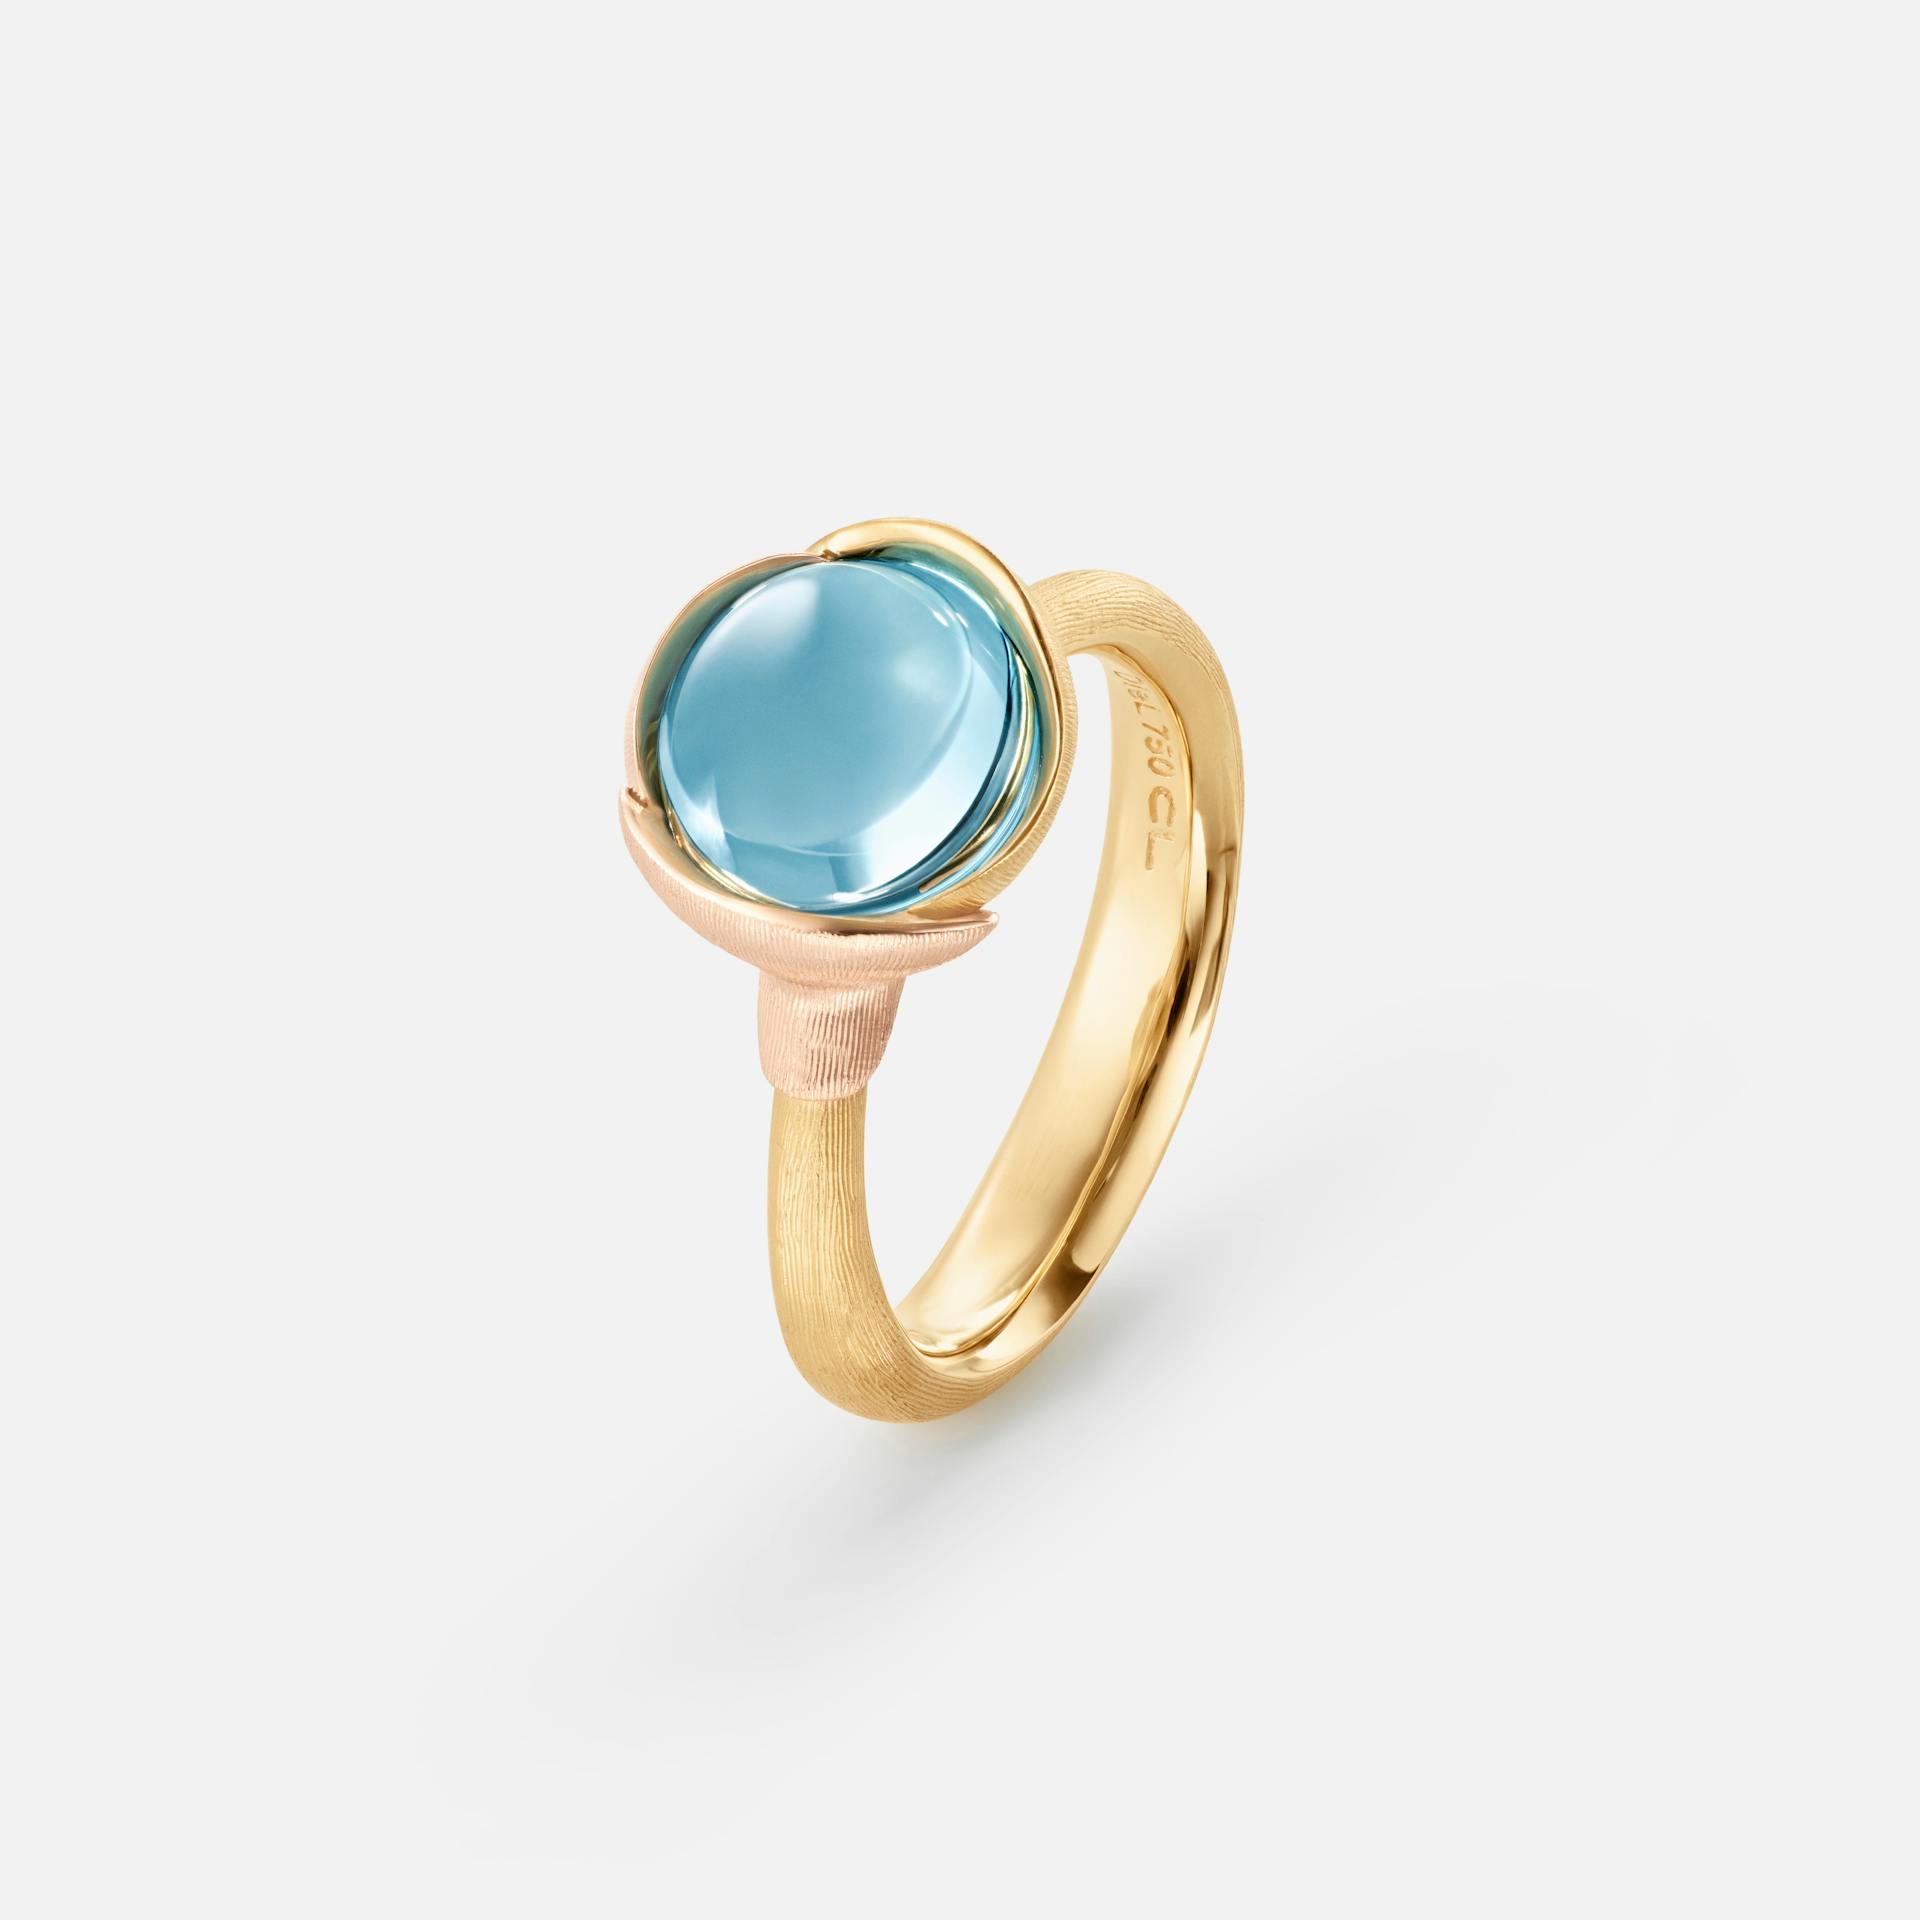 Lotus Ring size 1 in Yellow and Rose Gold  with Blue Topaz  |  Ole Lynggaard Copenhagen